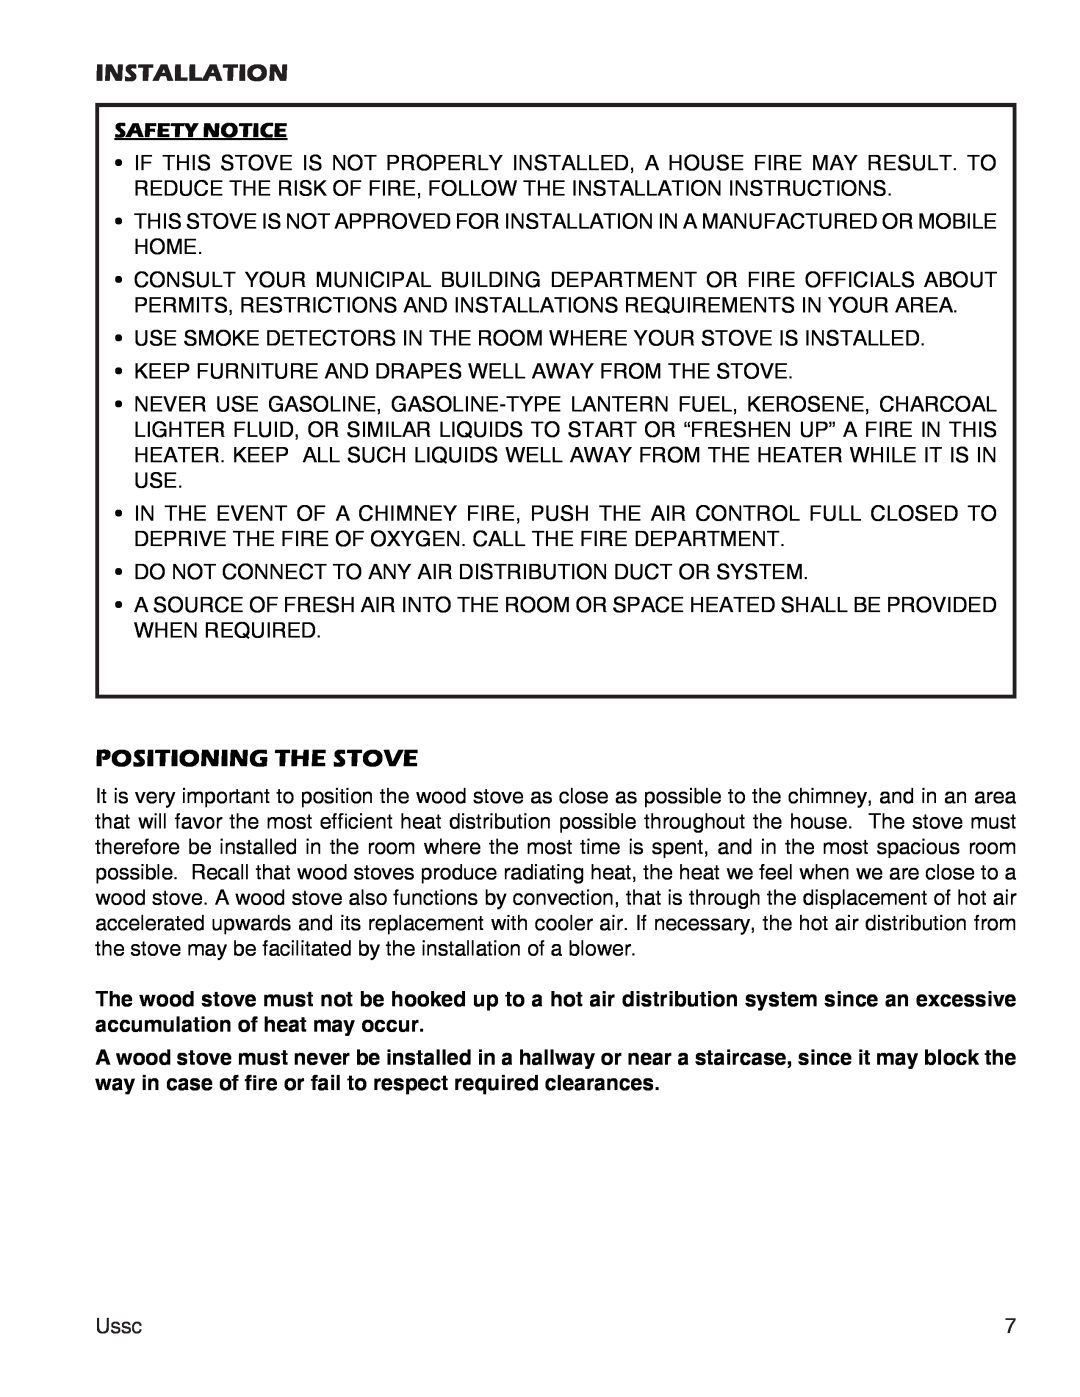 United States Stove 3000 (L) instruction manual Installation, Positioning The Stove, Safety Notice 